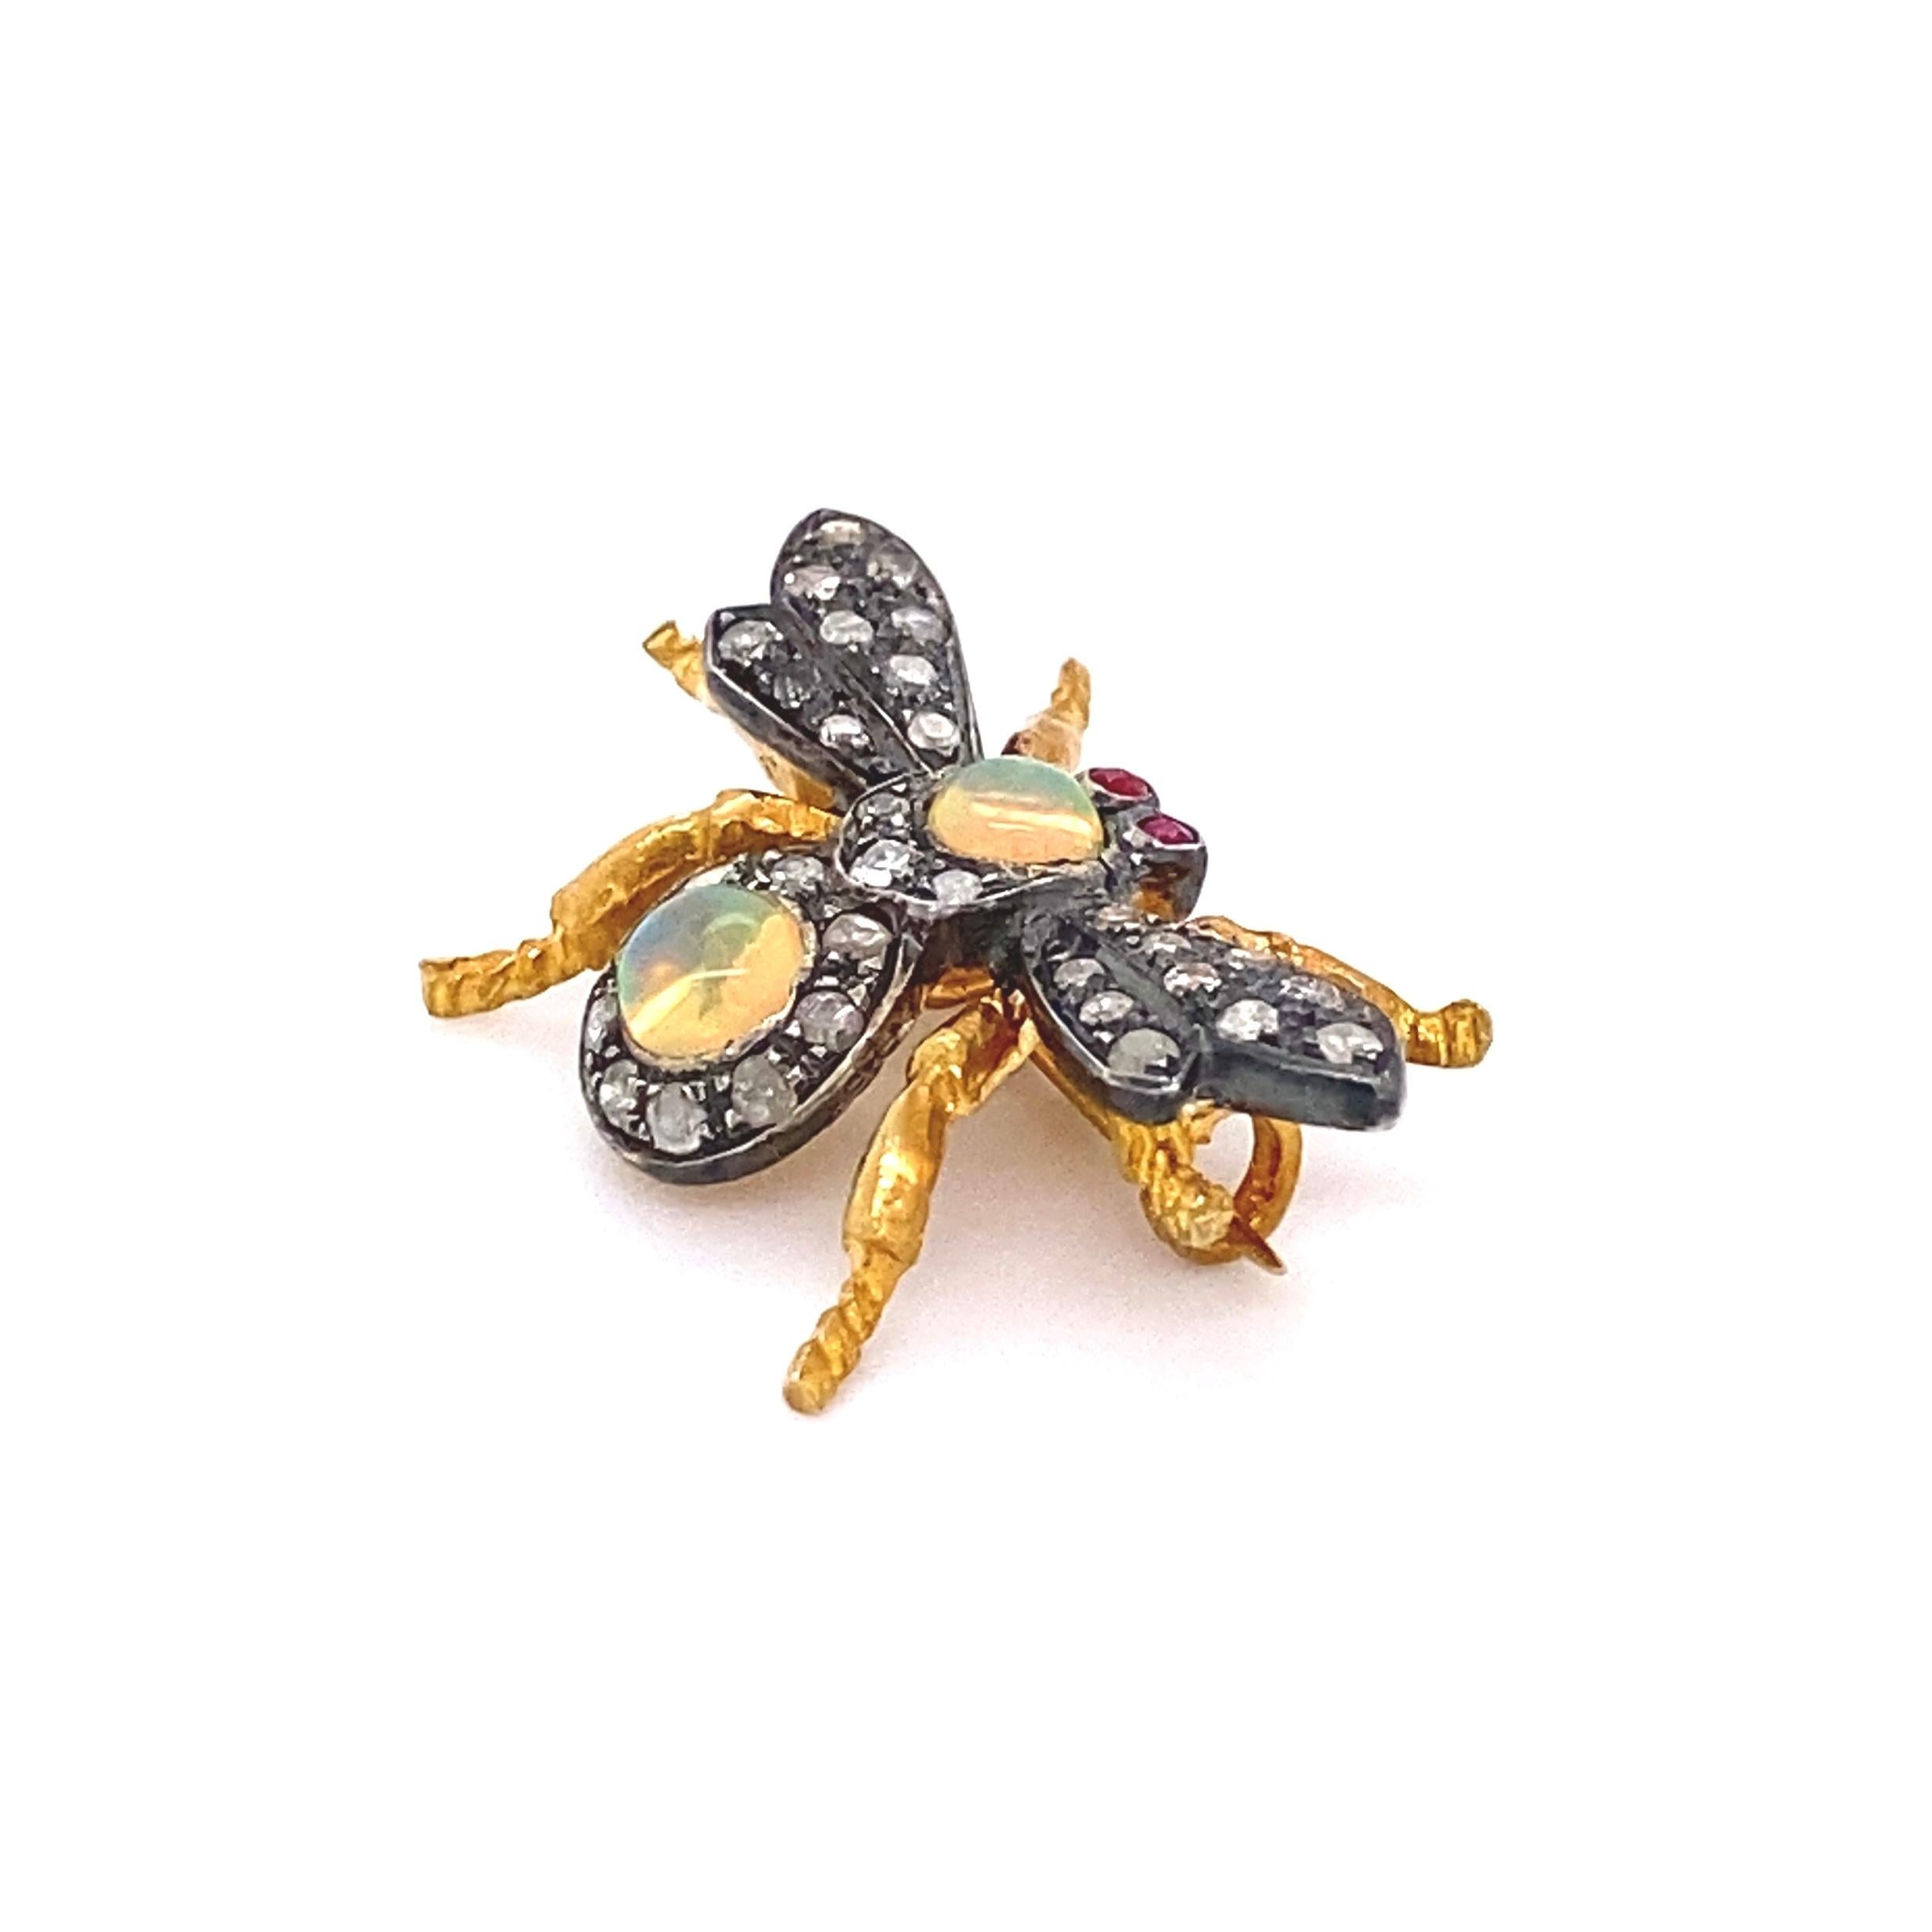 Mixed Cut Diamond Opal Ruby Gold and Silver Fly Bee Brooch Pin Fine Estate Jewelry